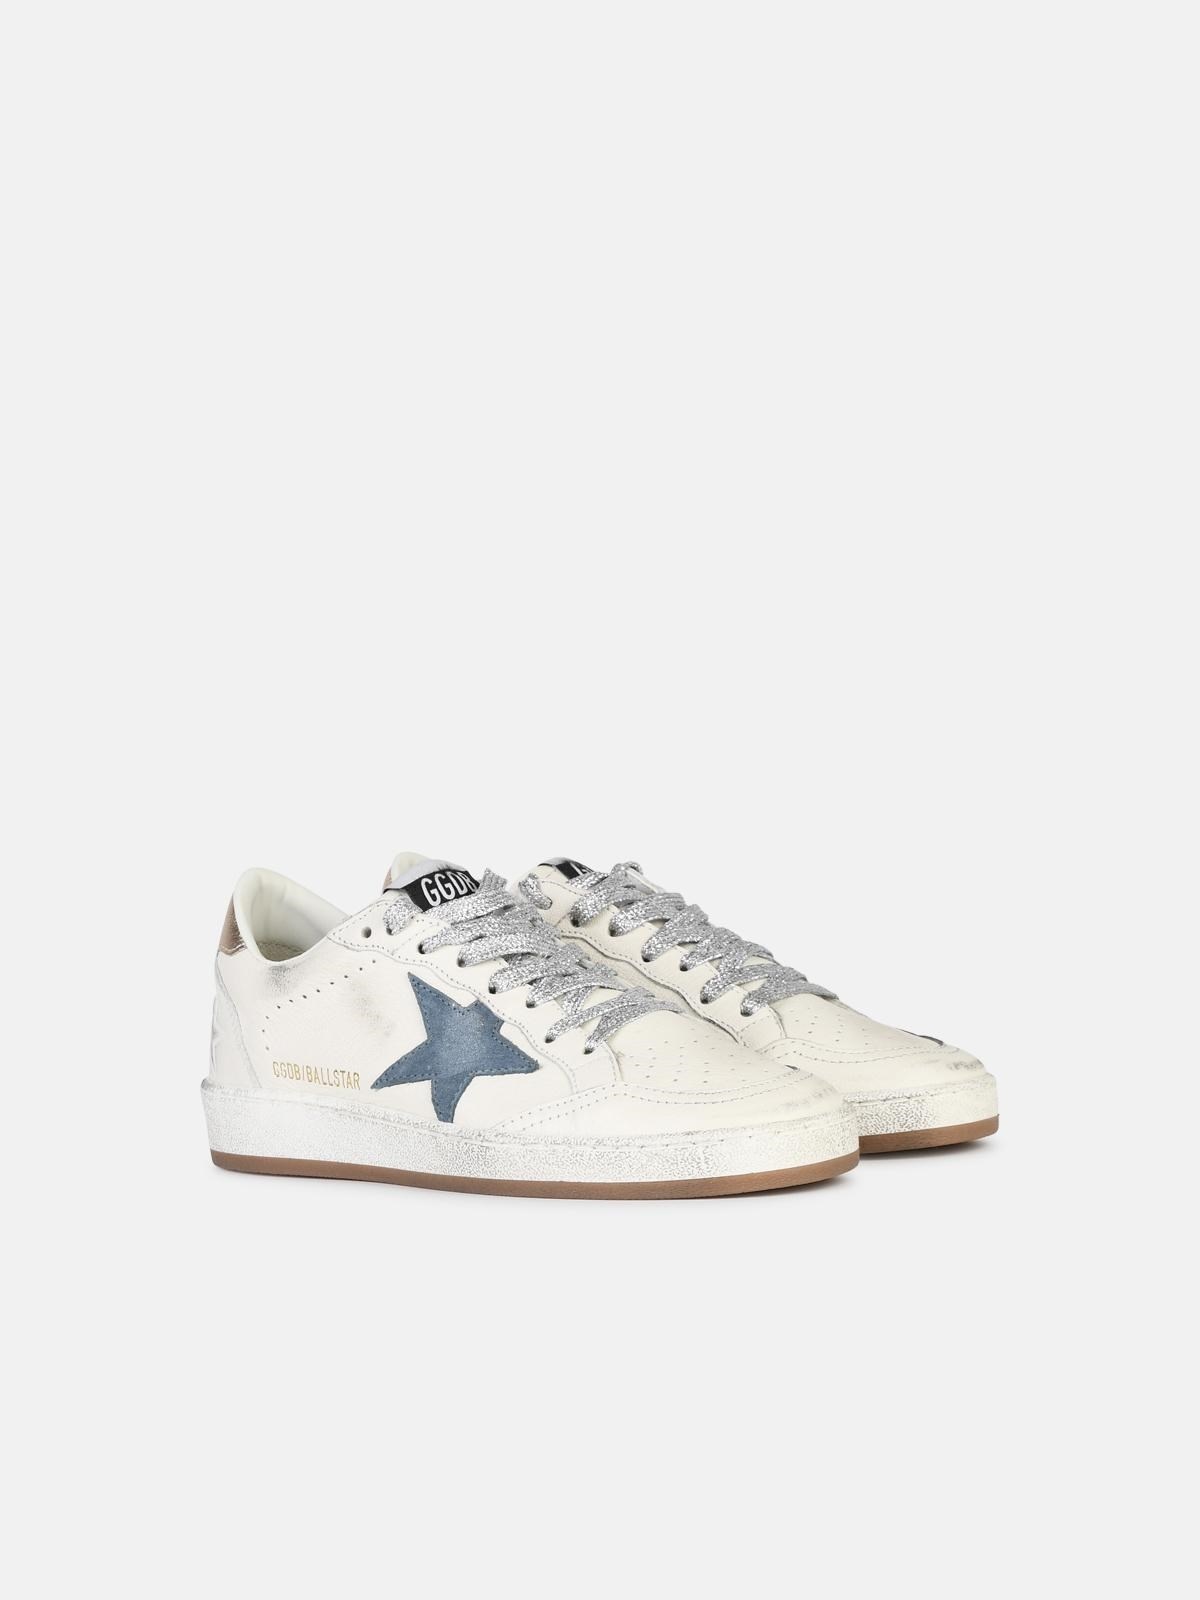 'BALL STAR' WHITE LEATHER SNEAKERS - 2